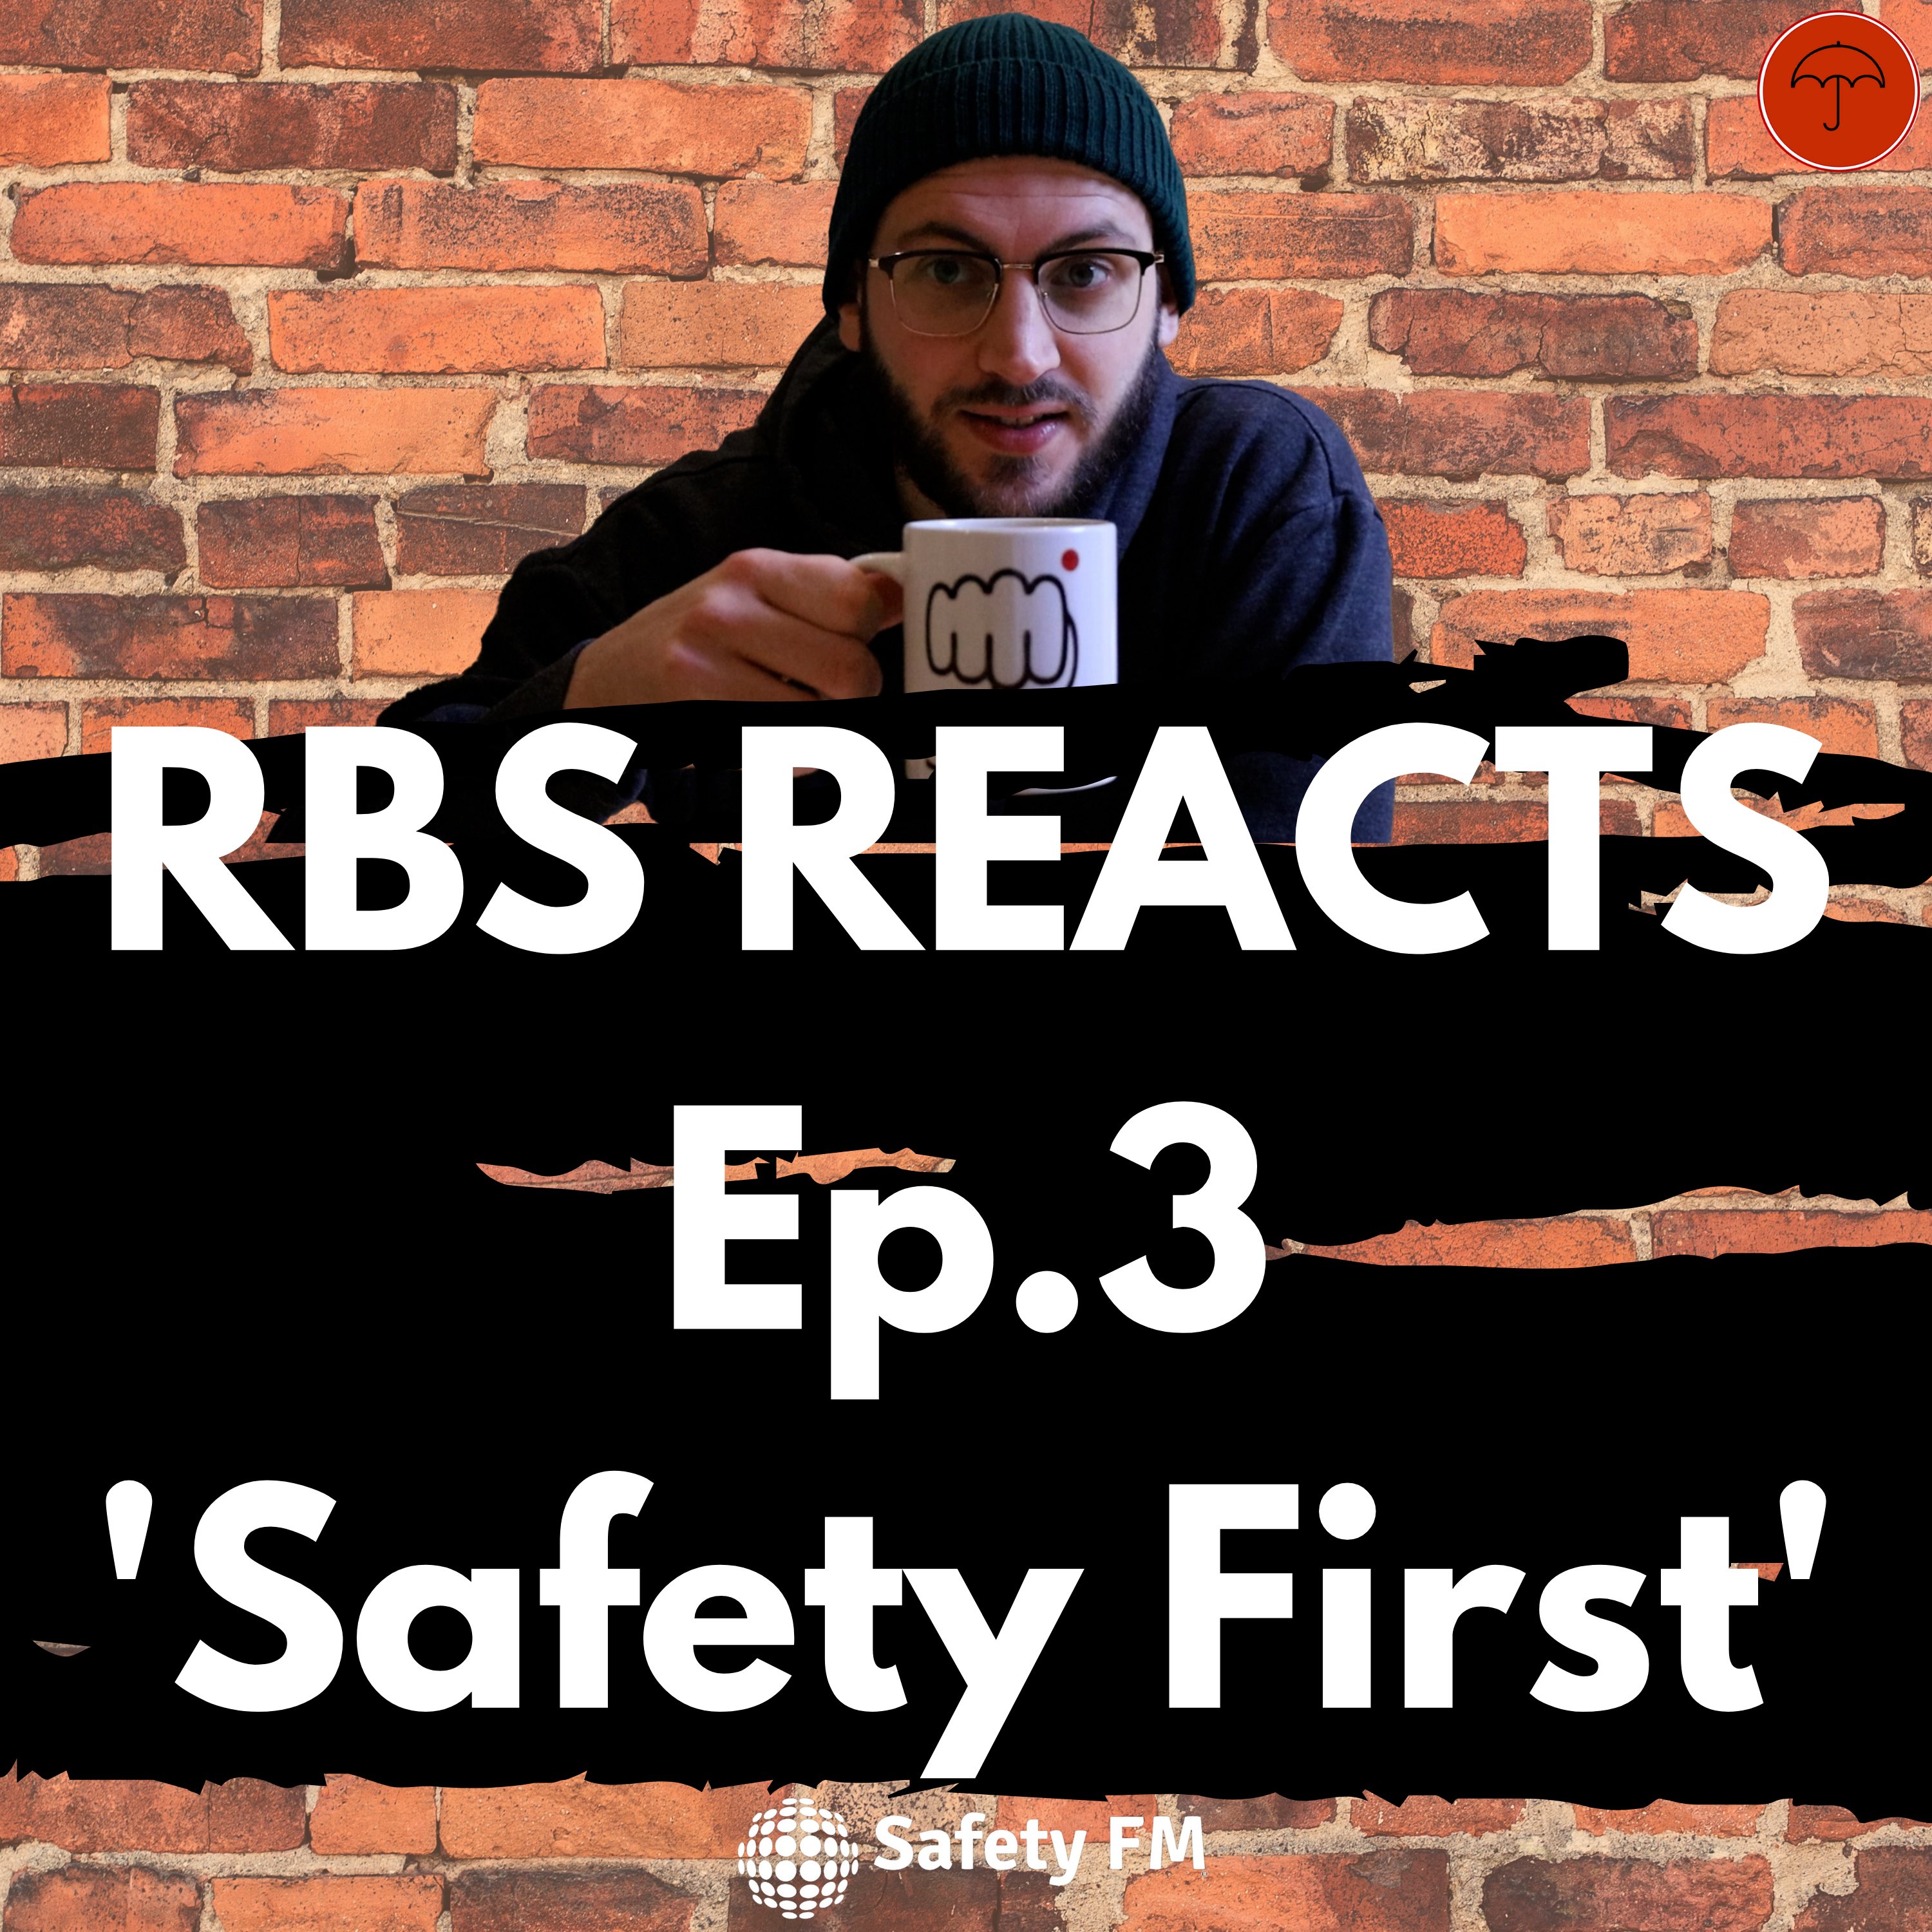 Rebranding Safety REACTS - Episode 3 - ’Safety First’